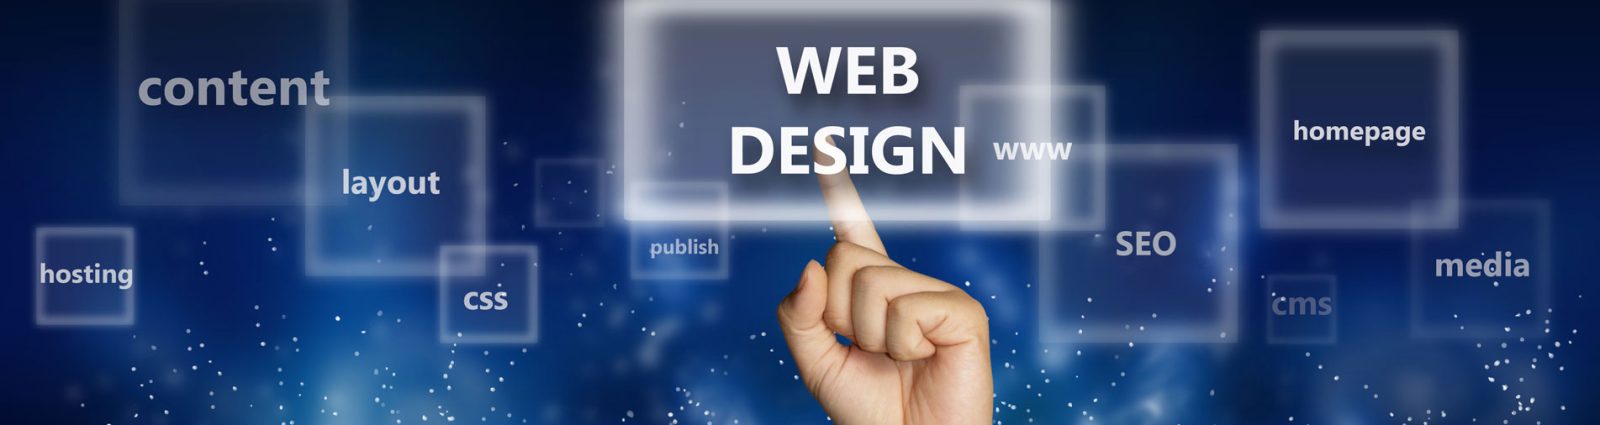 22 Key Elements for Developing an Effective Medical Web Design Project